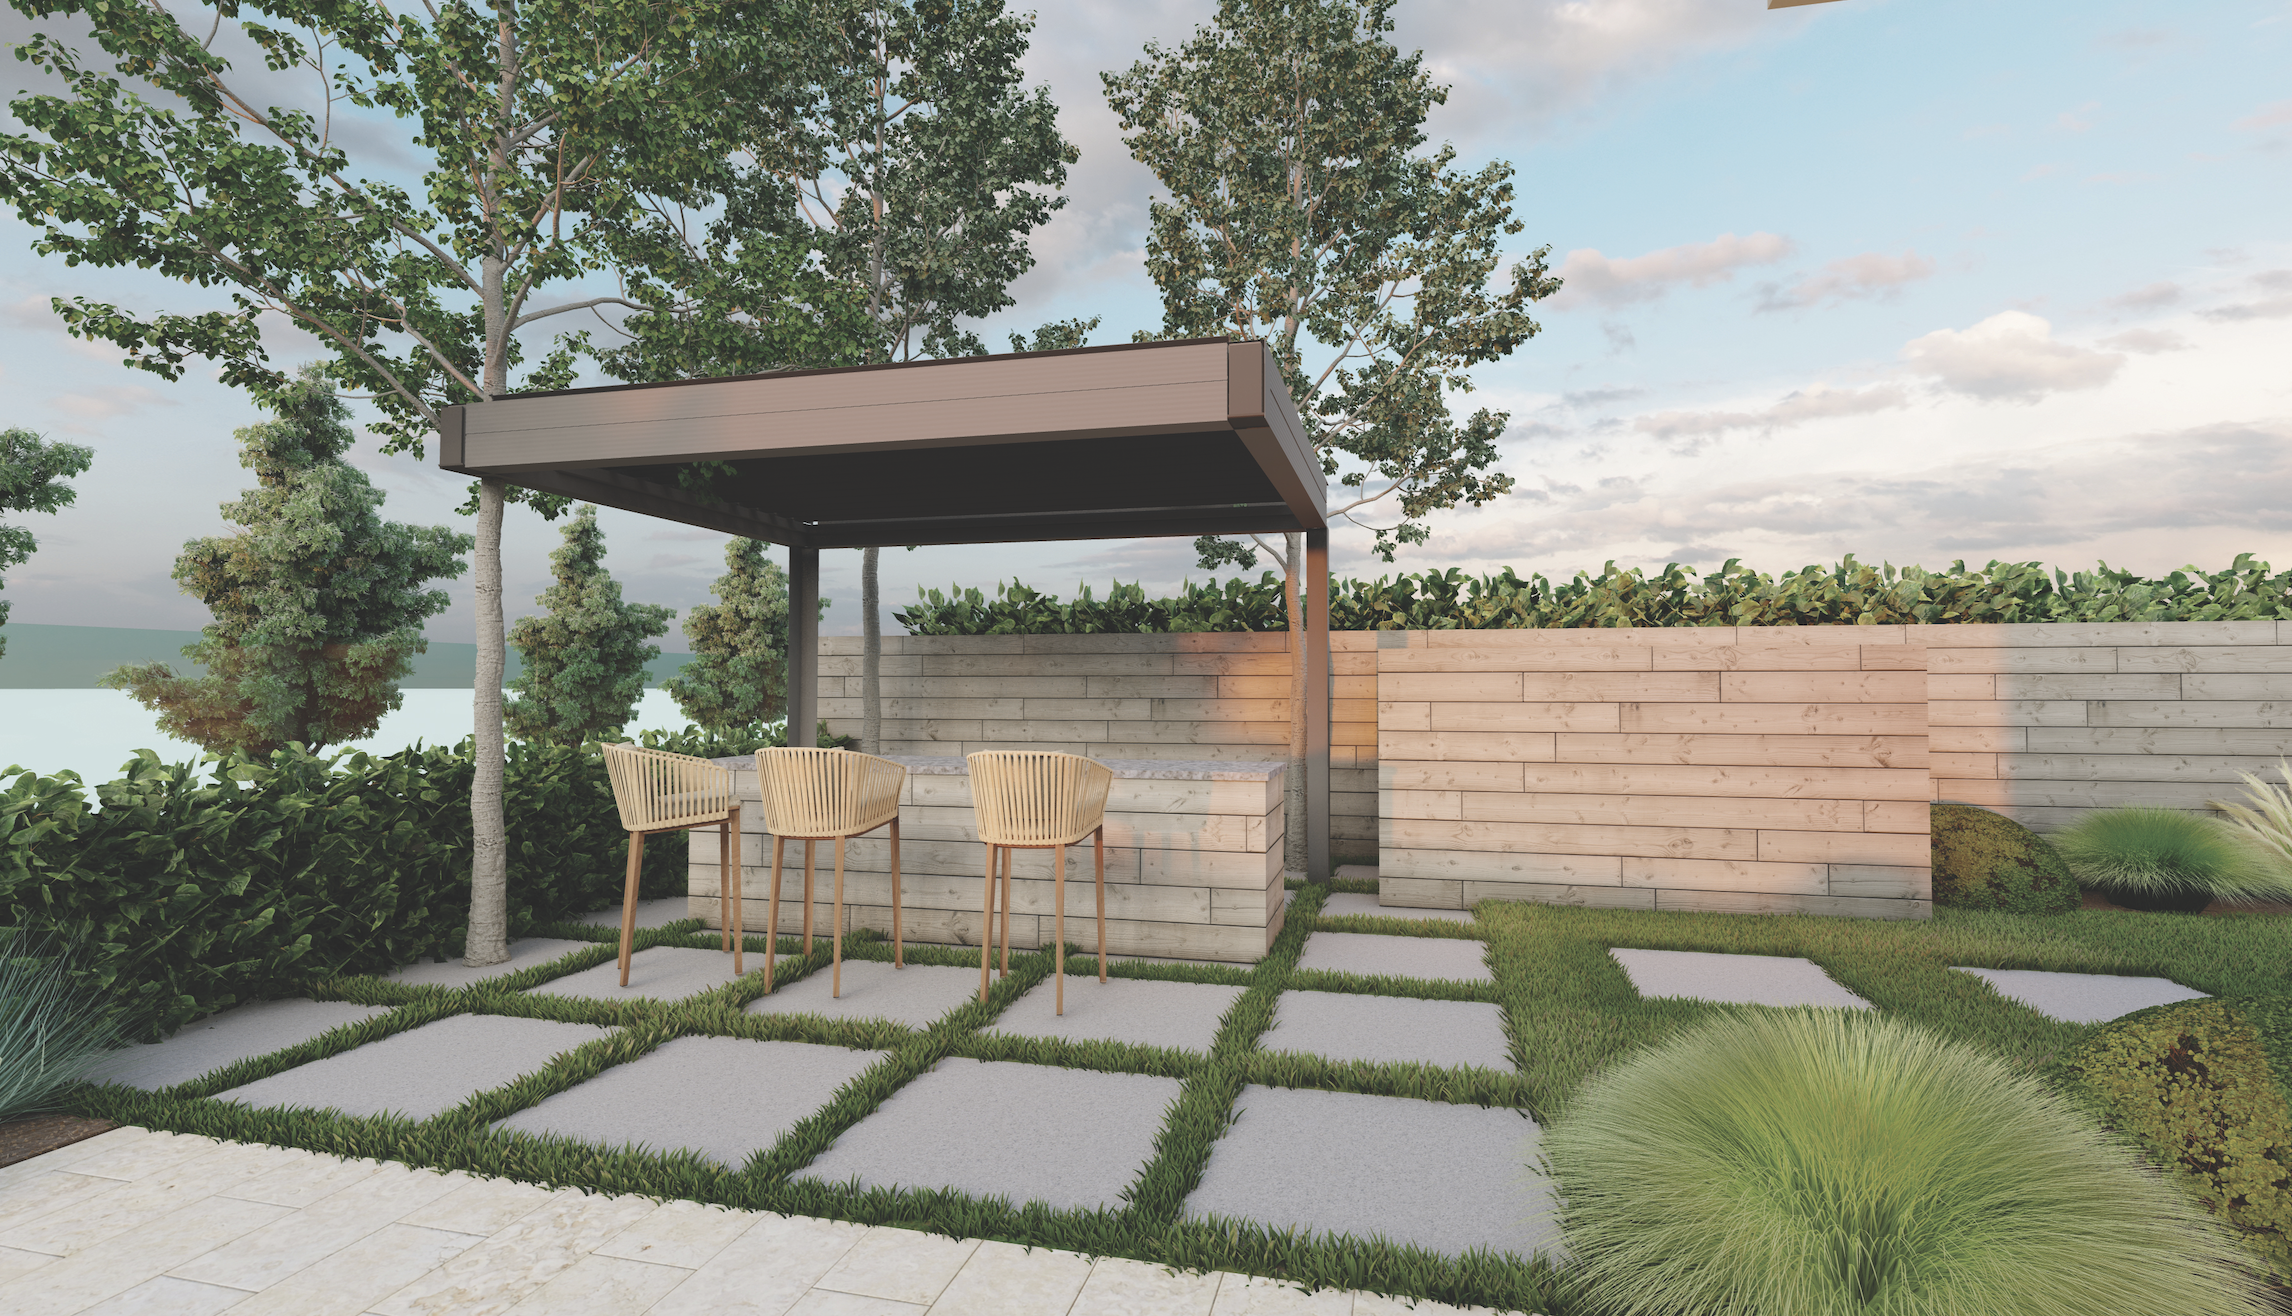 A Greener Tomorrow's rendering of a residential outdoor space